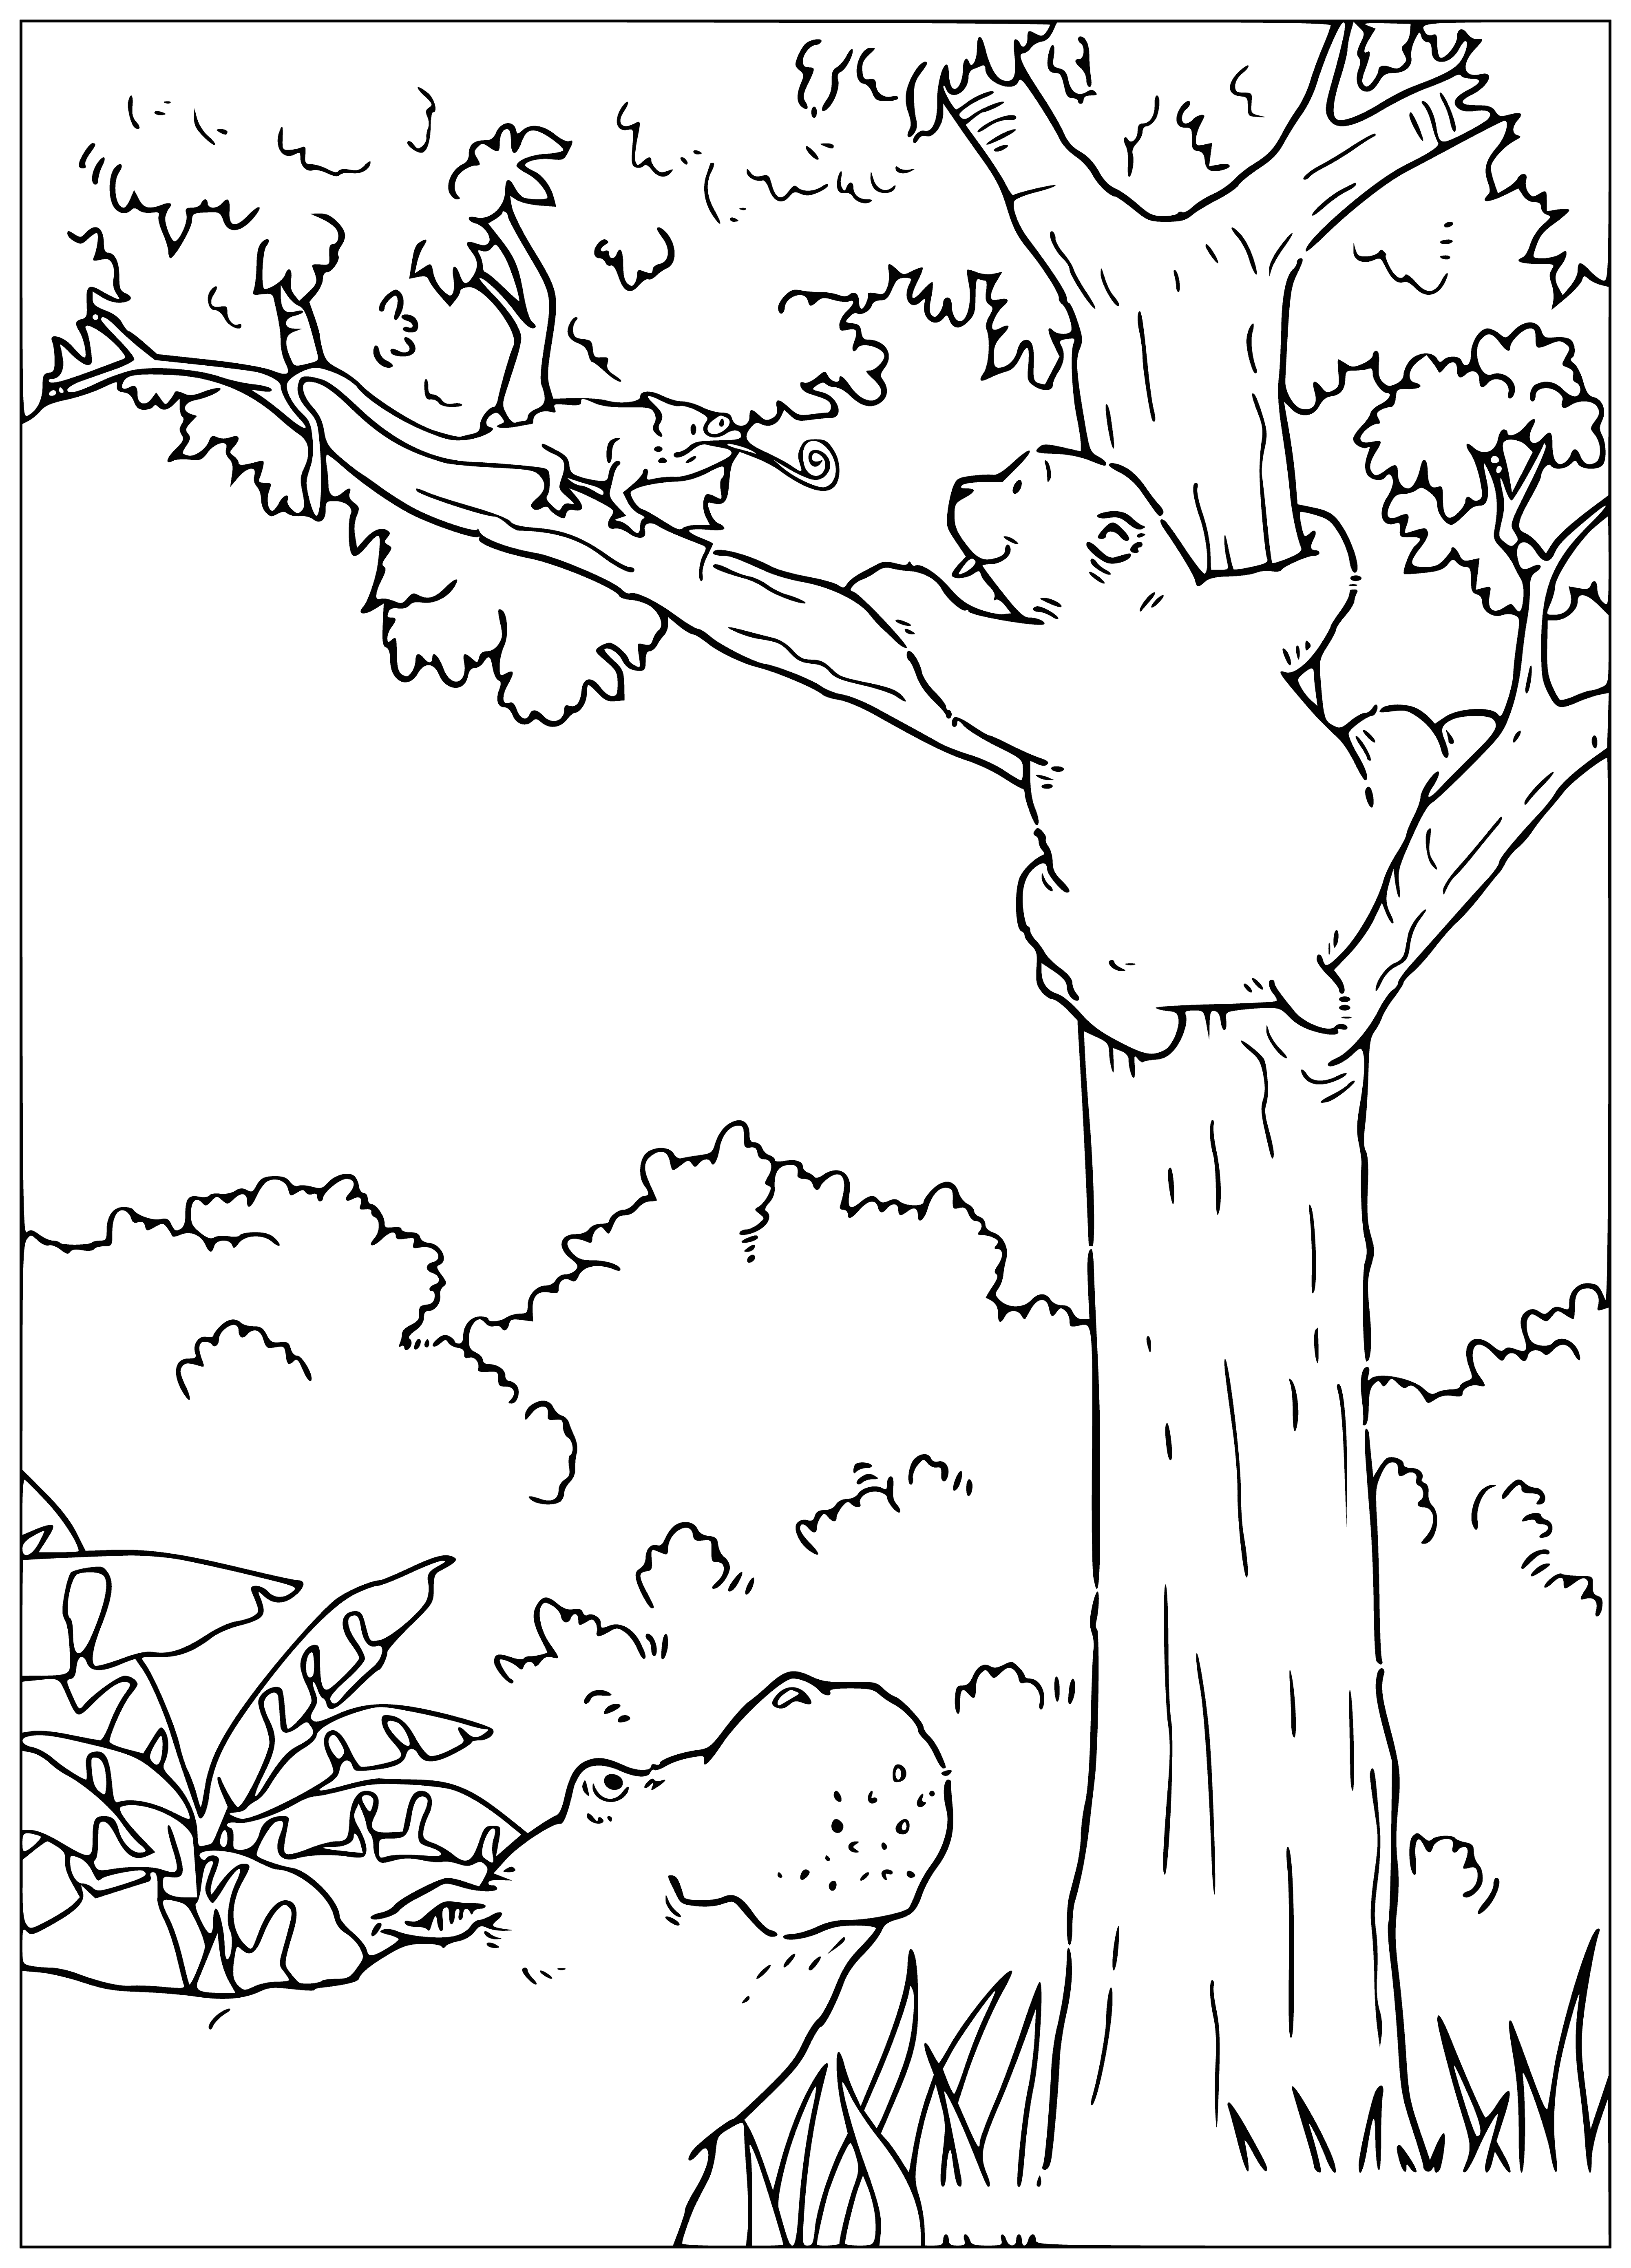 Lars and the chameleon coloring page